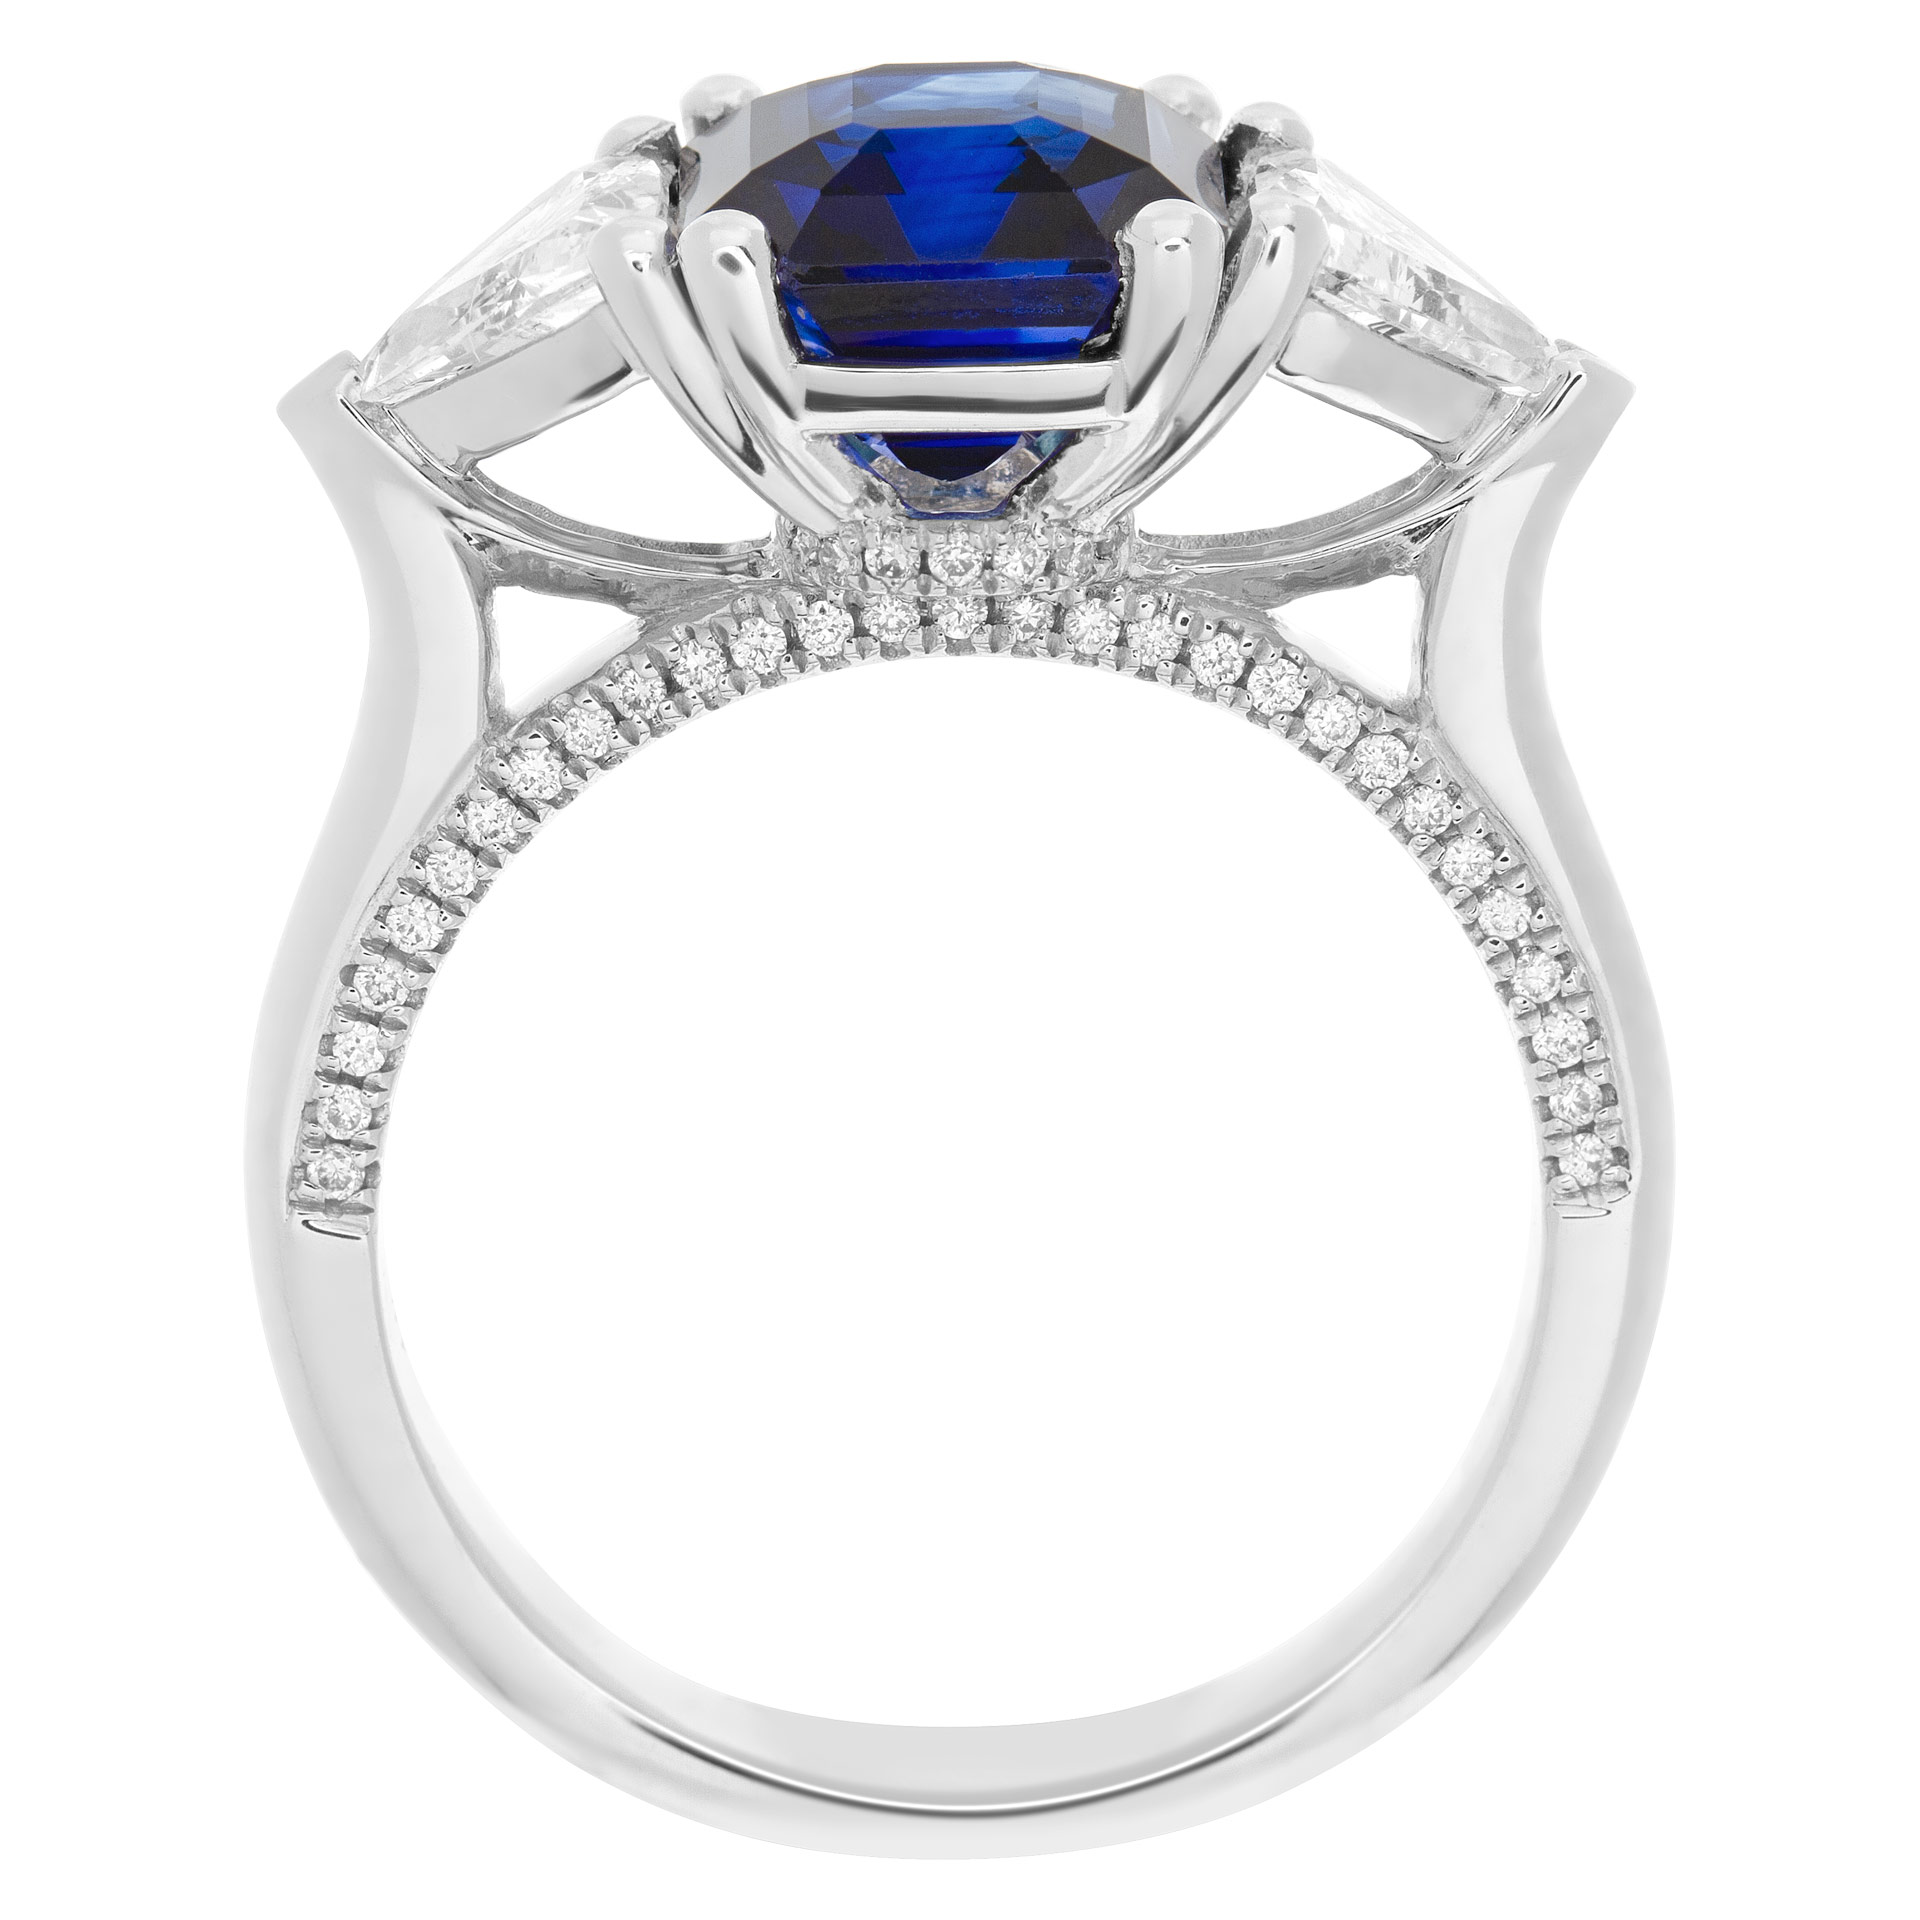 Stunning blue sapphire and diamond ring in platinum with 4.49 carats in central sapphire and 1.01 carats in side triangle cut diamonds image 4